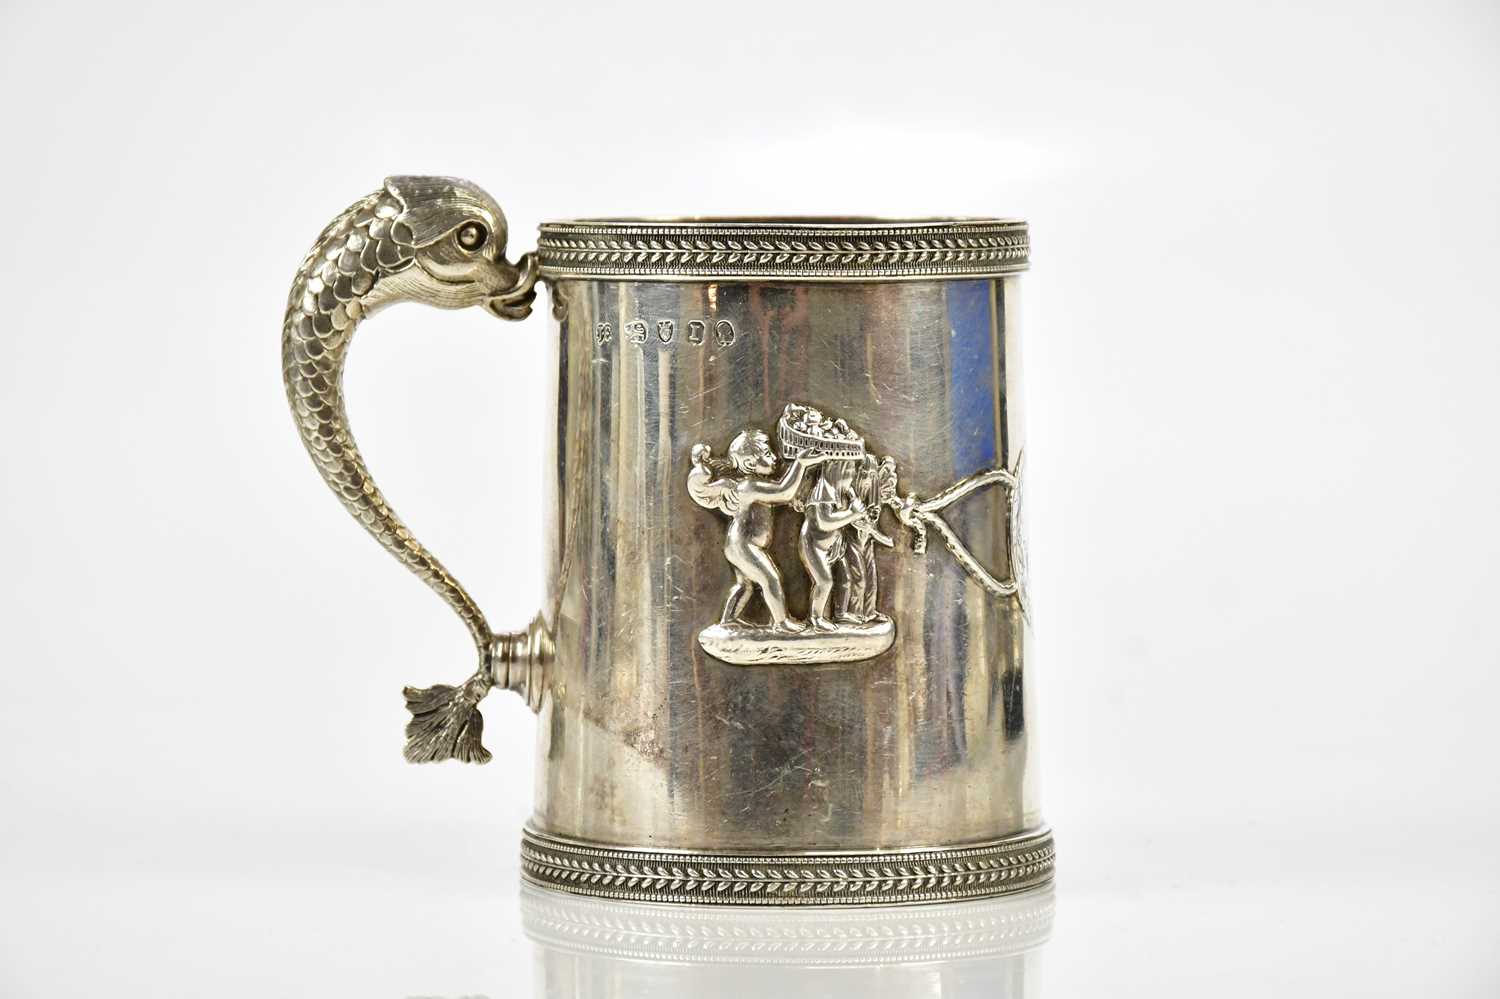 JOHN EMES; a George III hallmarked silver mug, with dolphin handle and cast borders within which